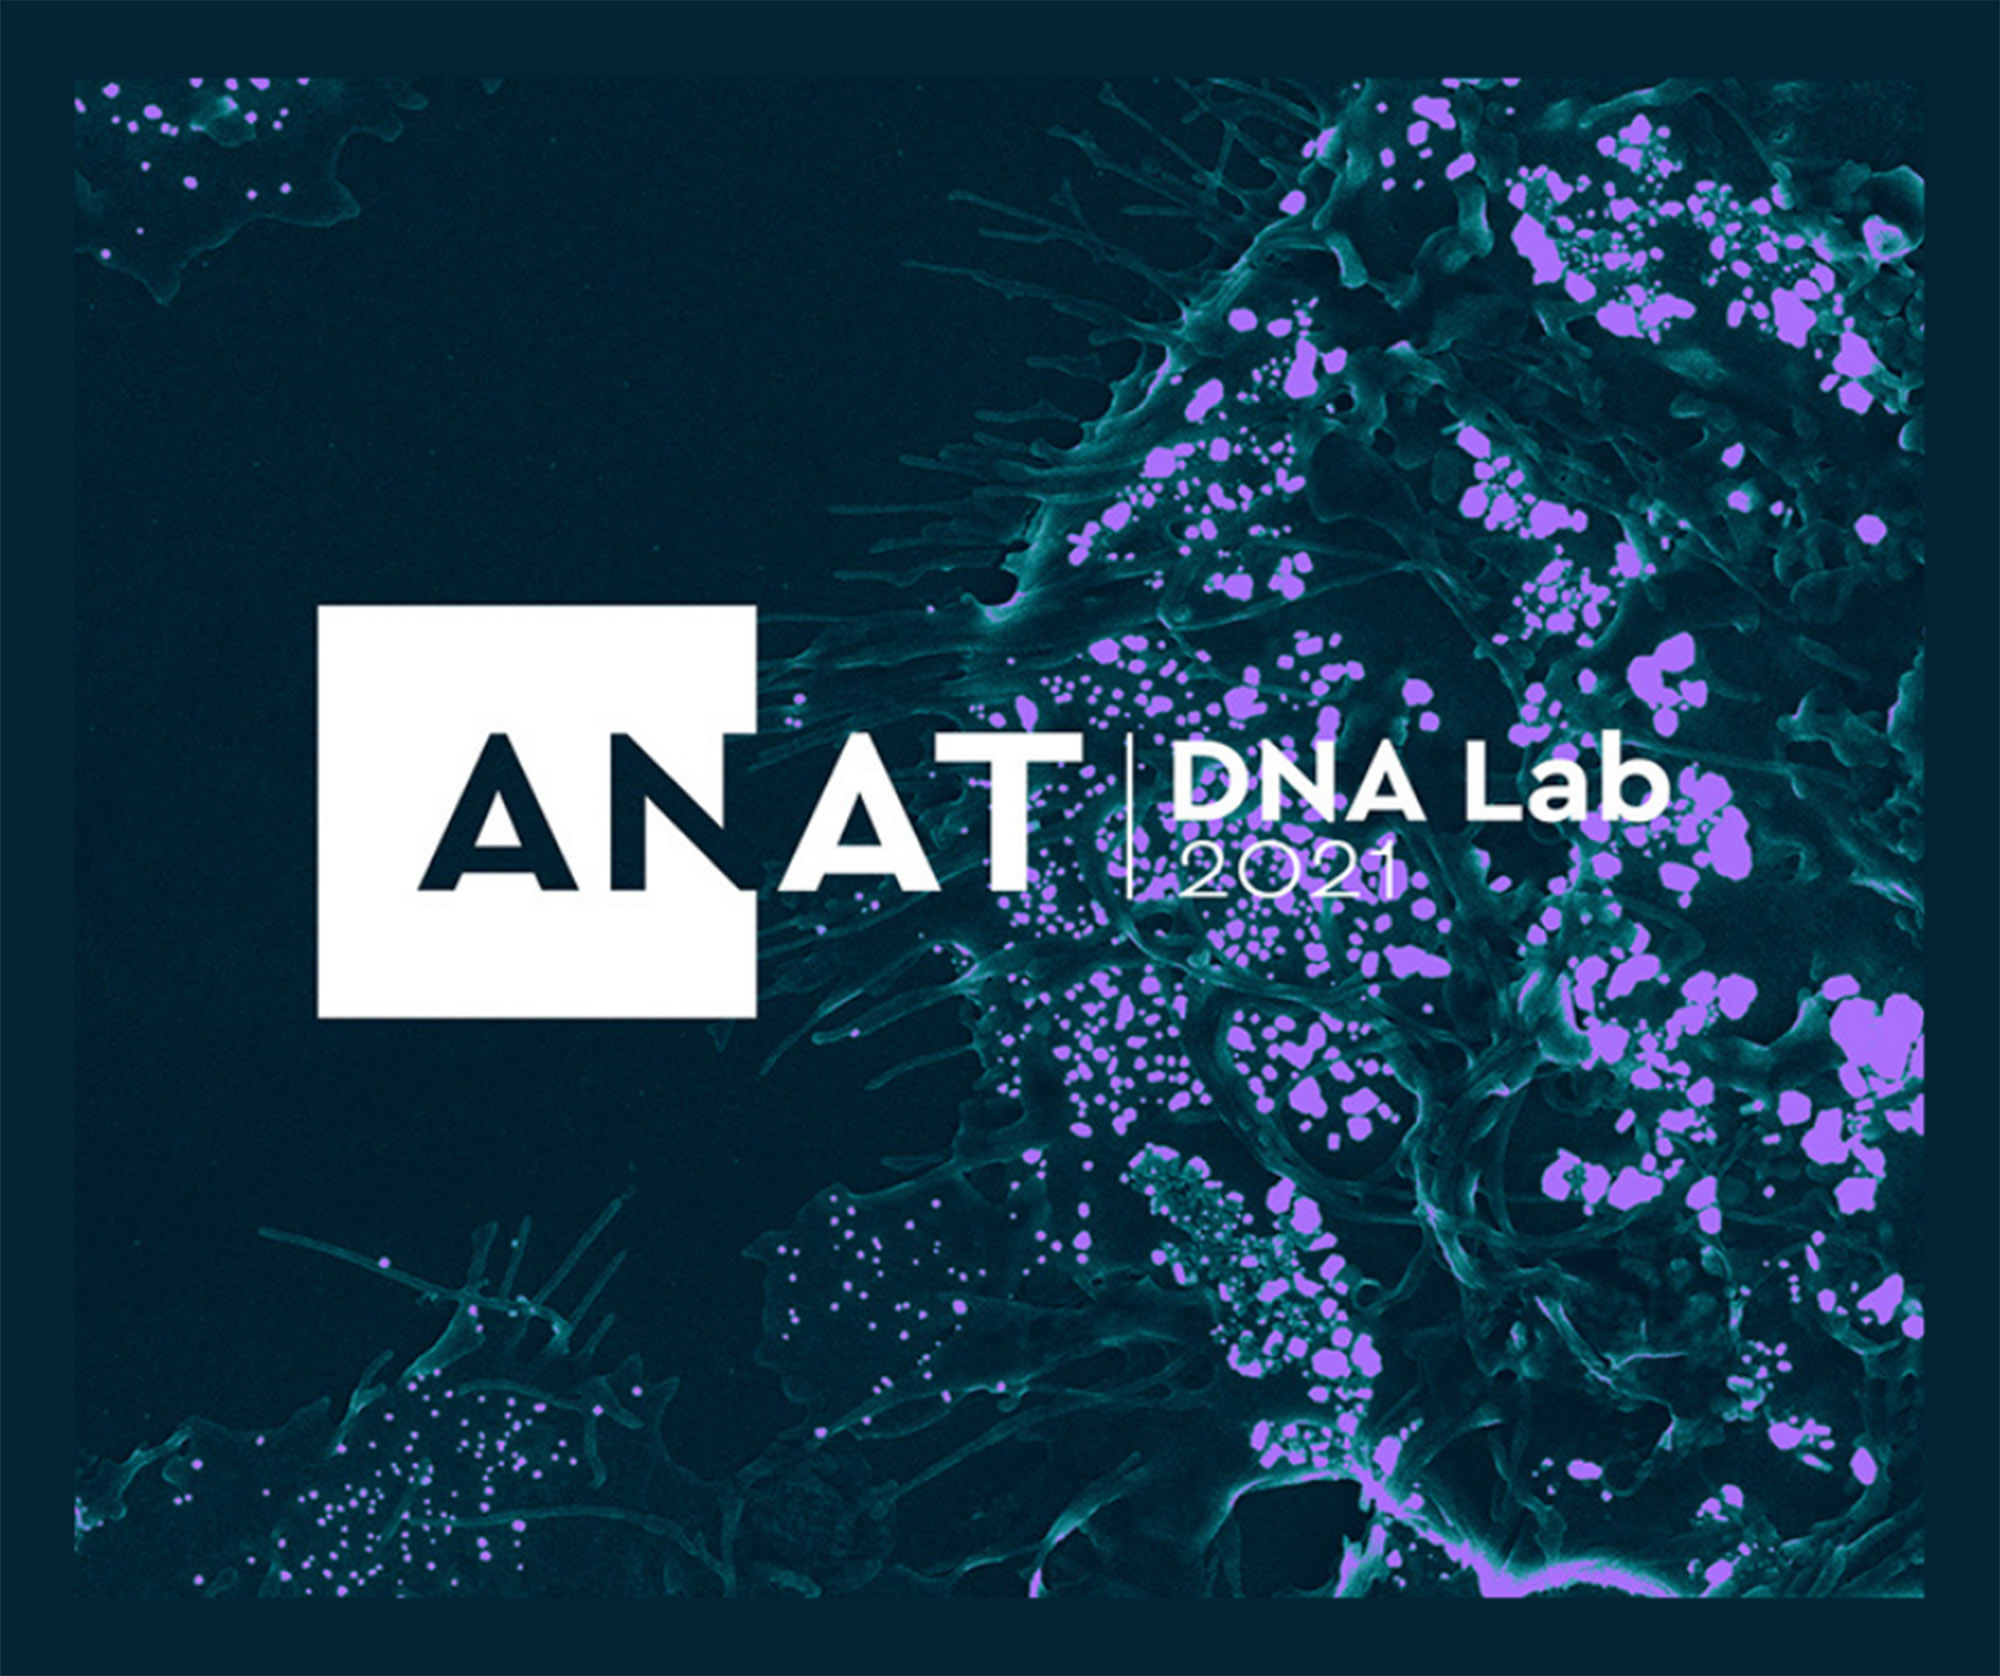 Promotion image for ANAT DNA lab. Image by Andrea Rassell.